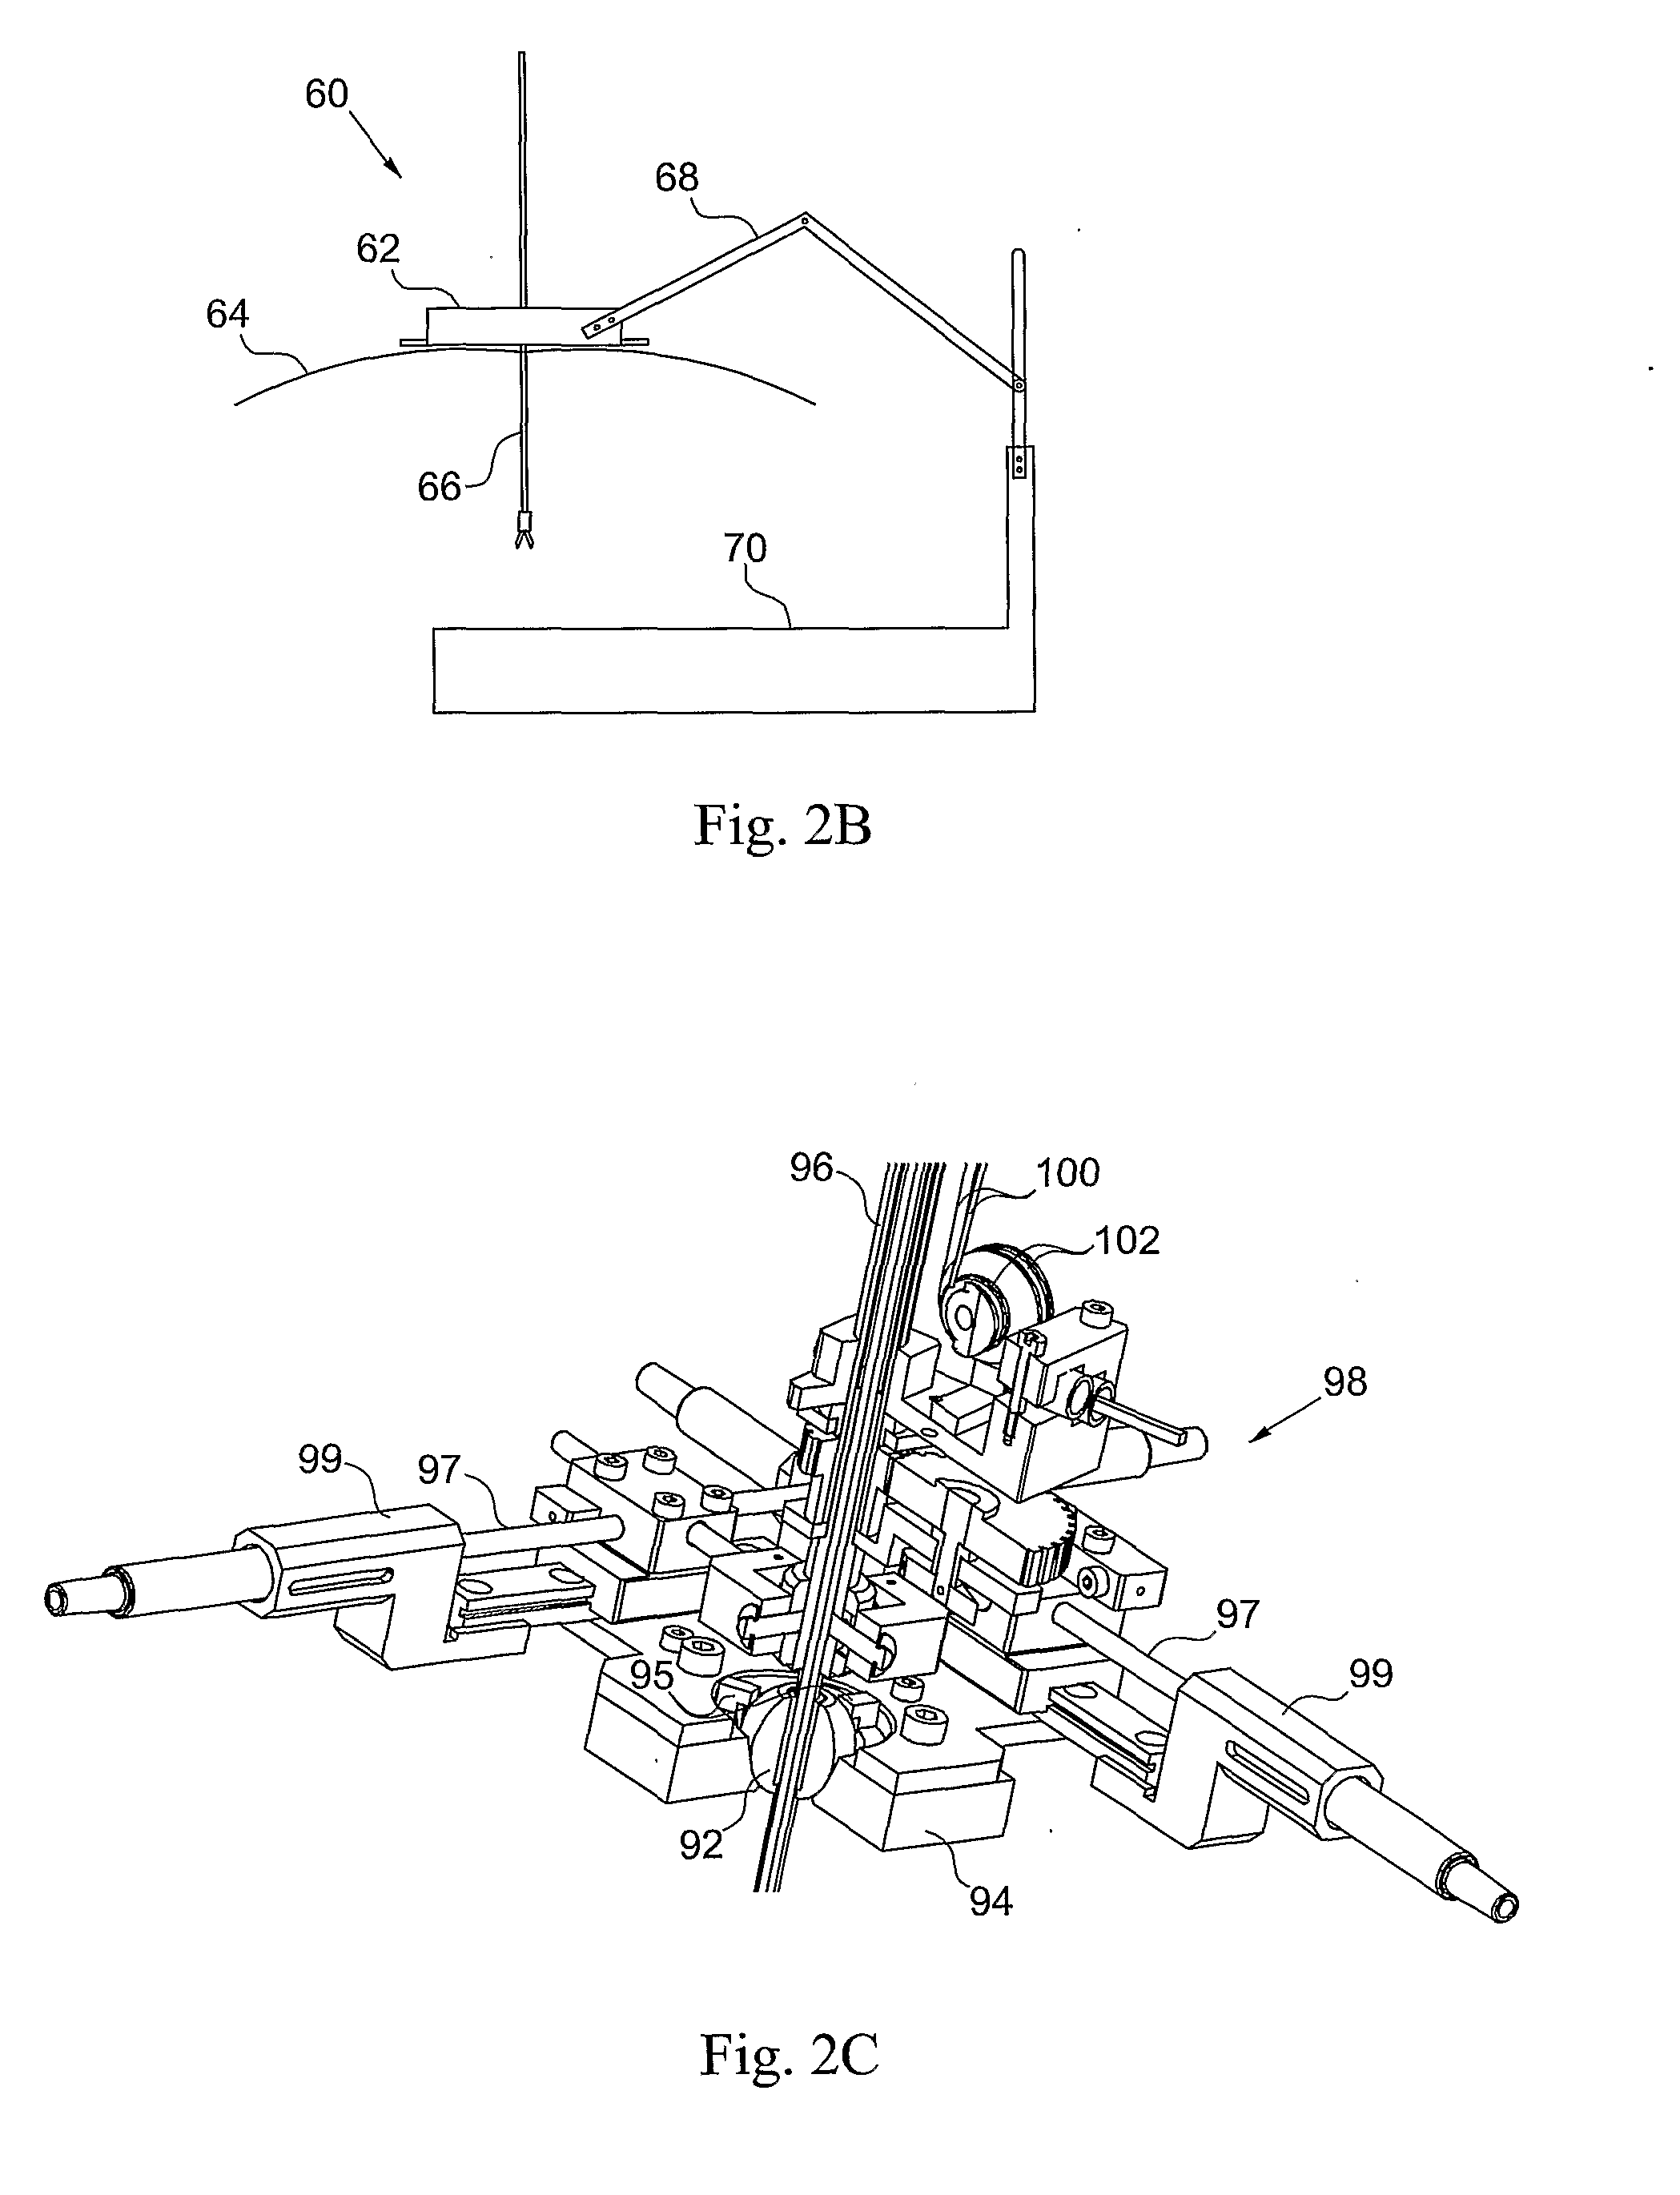 System and method for telesurgery